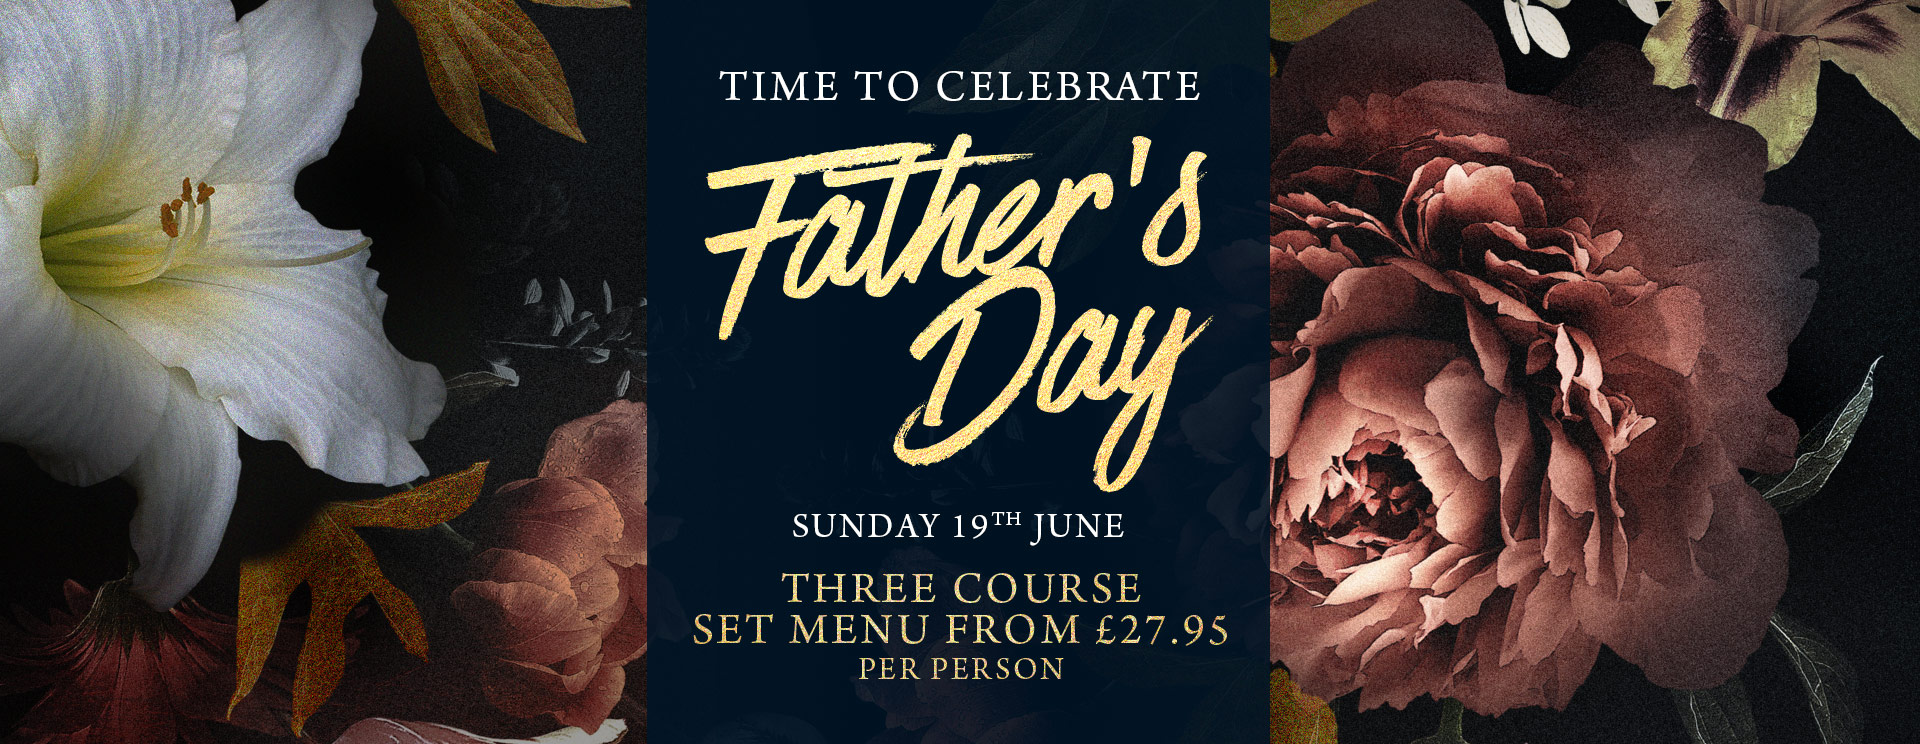 Fathers Day at The Minnow